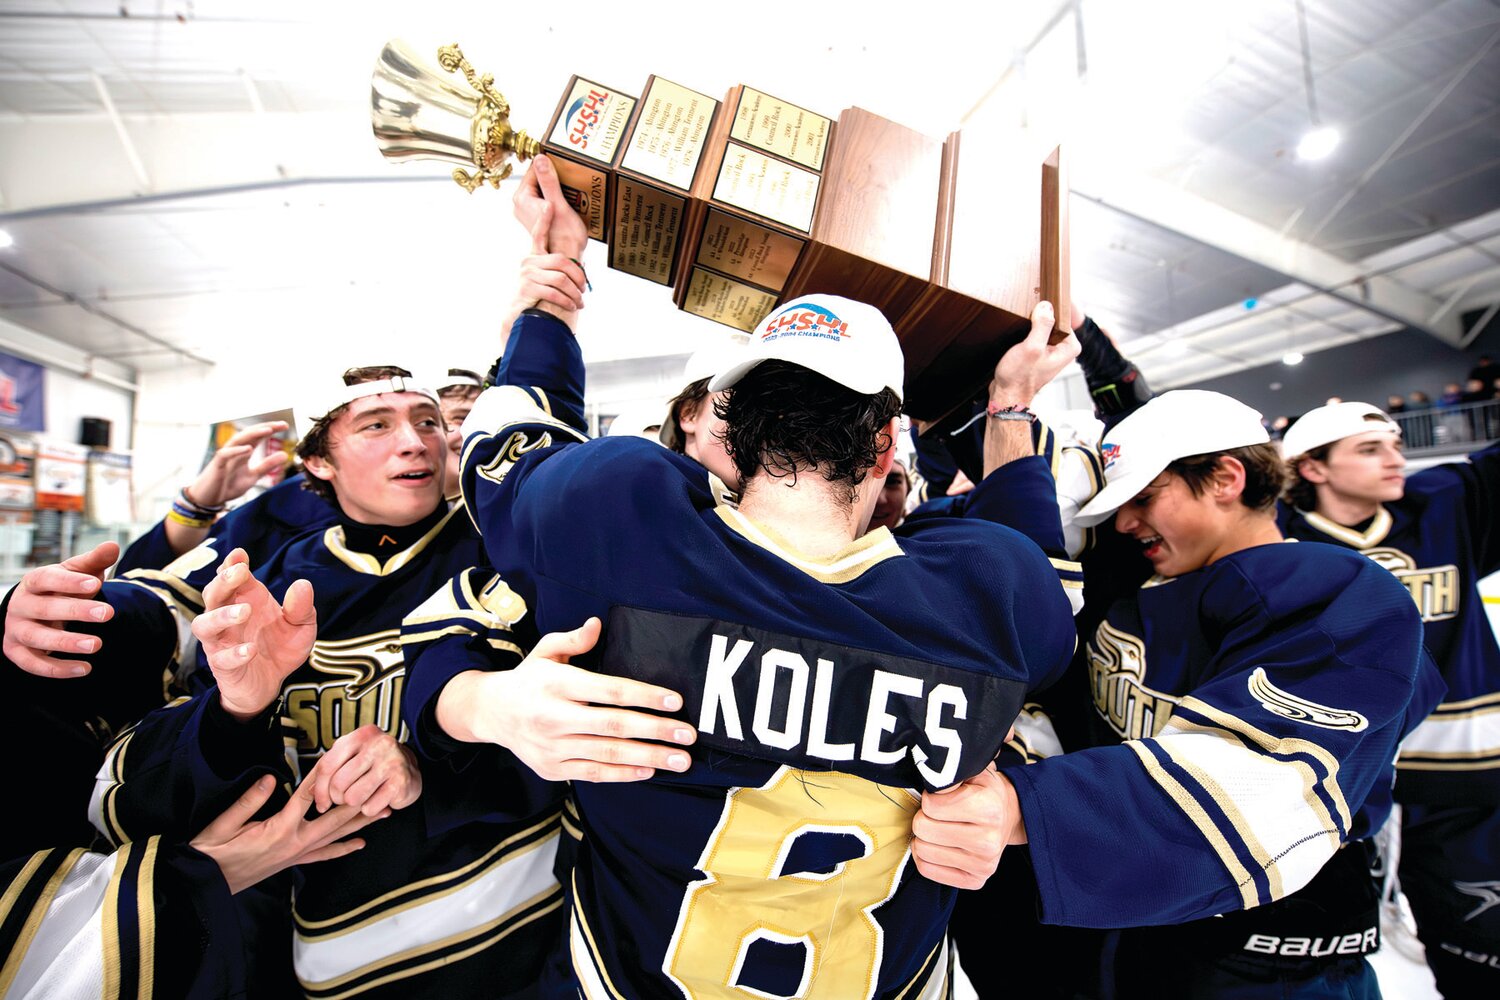 Council Rock South captain Kevin Koles joins the team after being presented the Suburban High School Hockey League championship trophy.